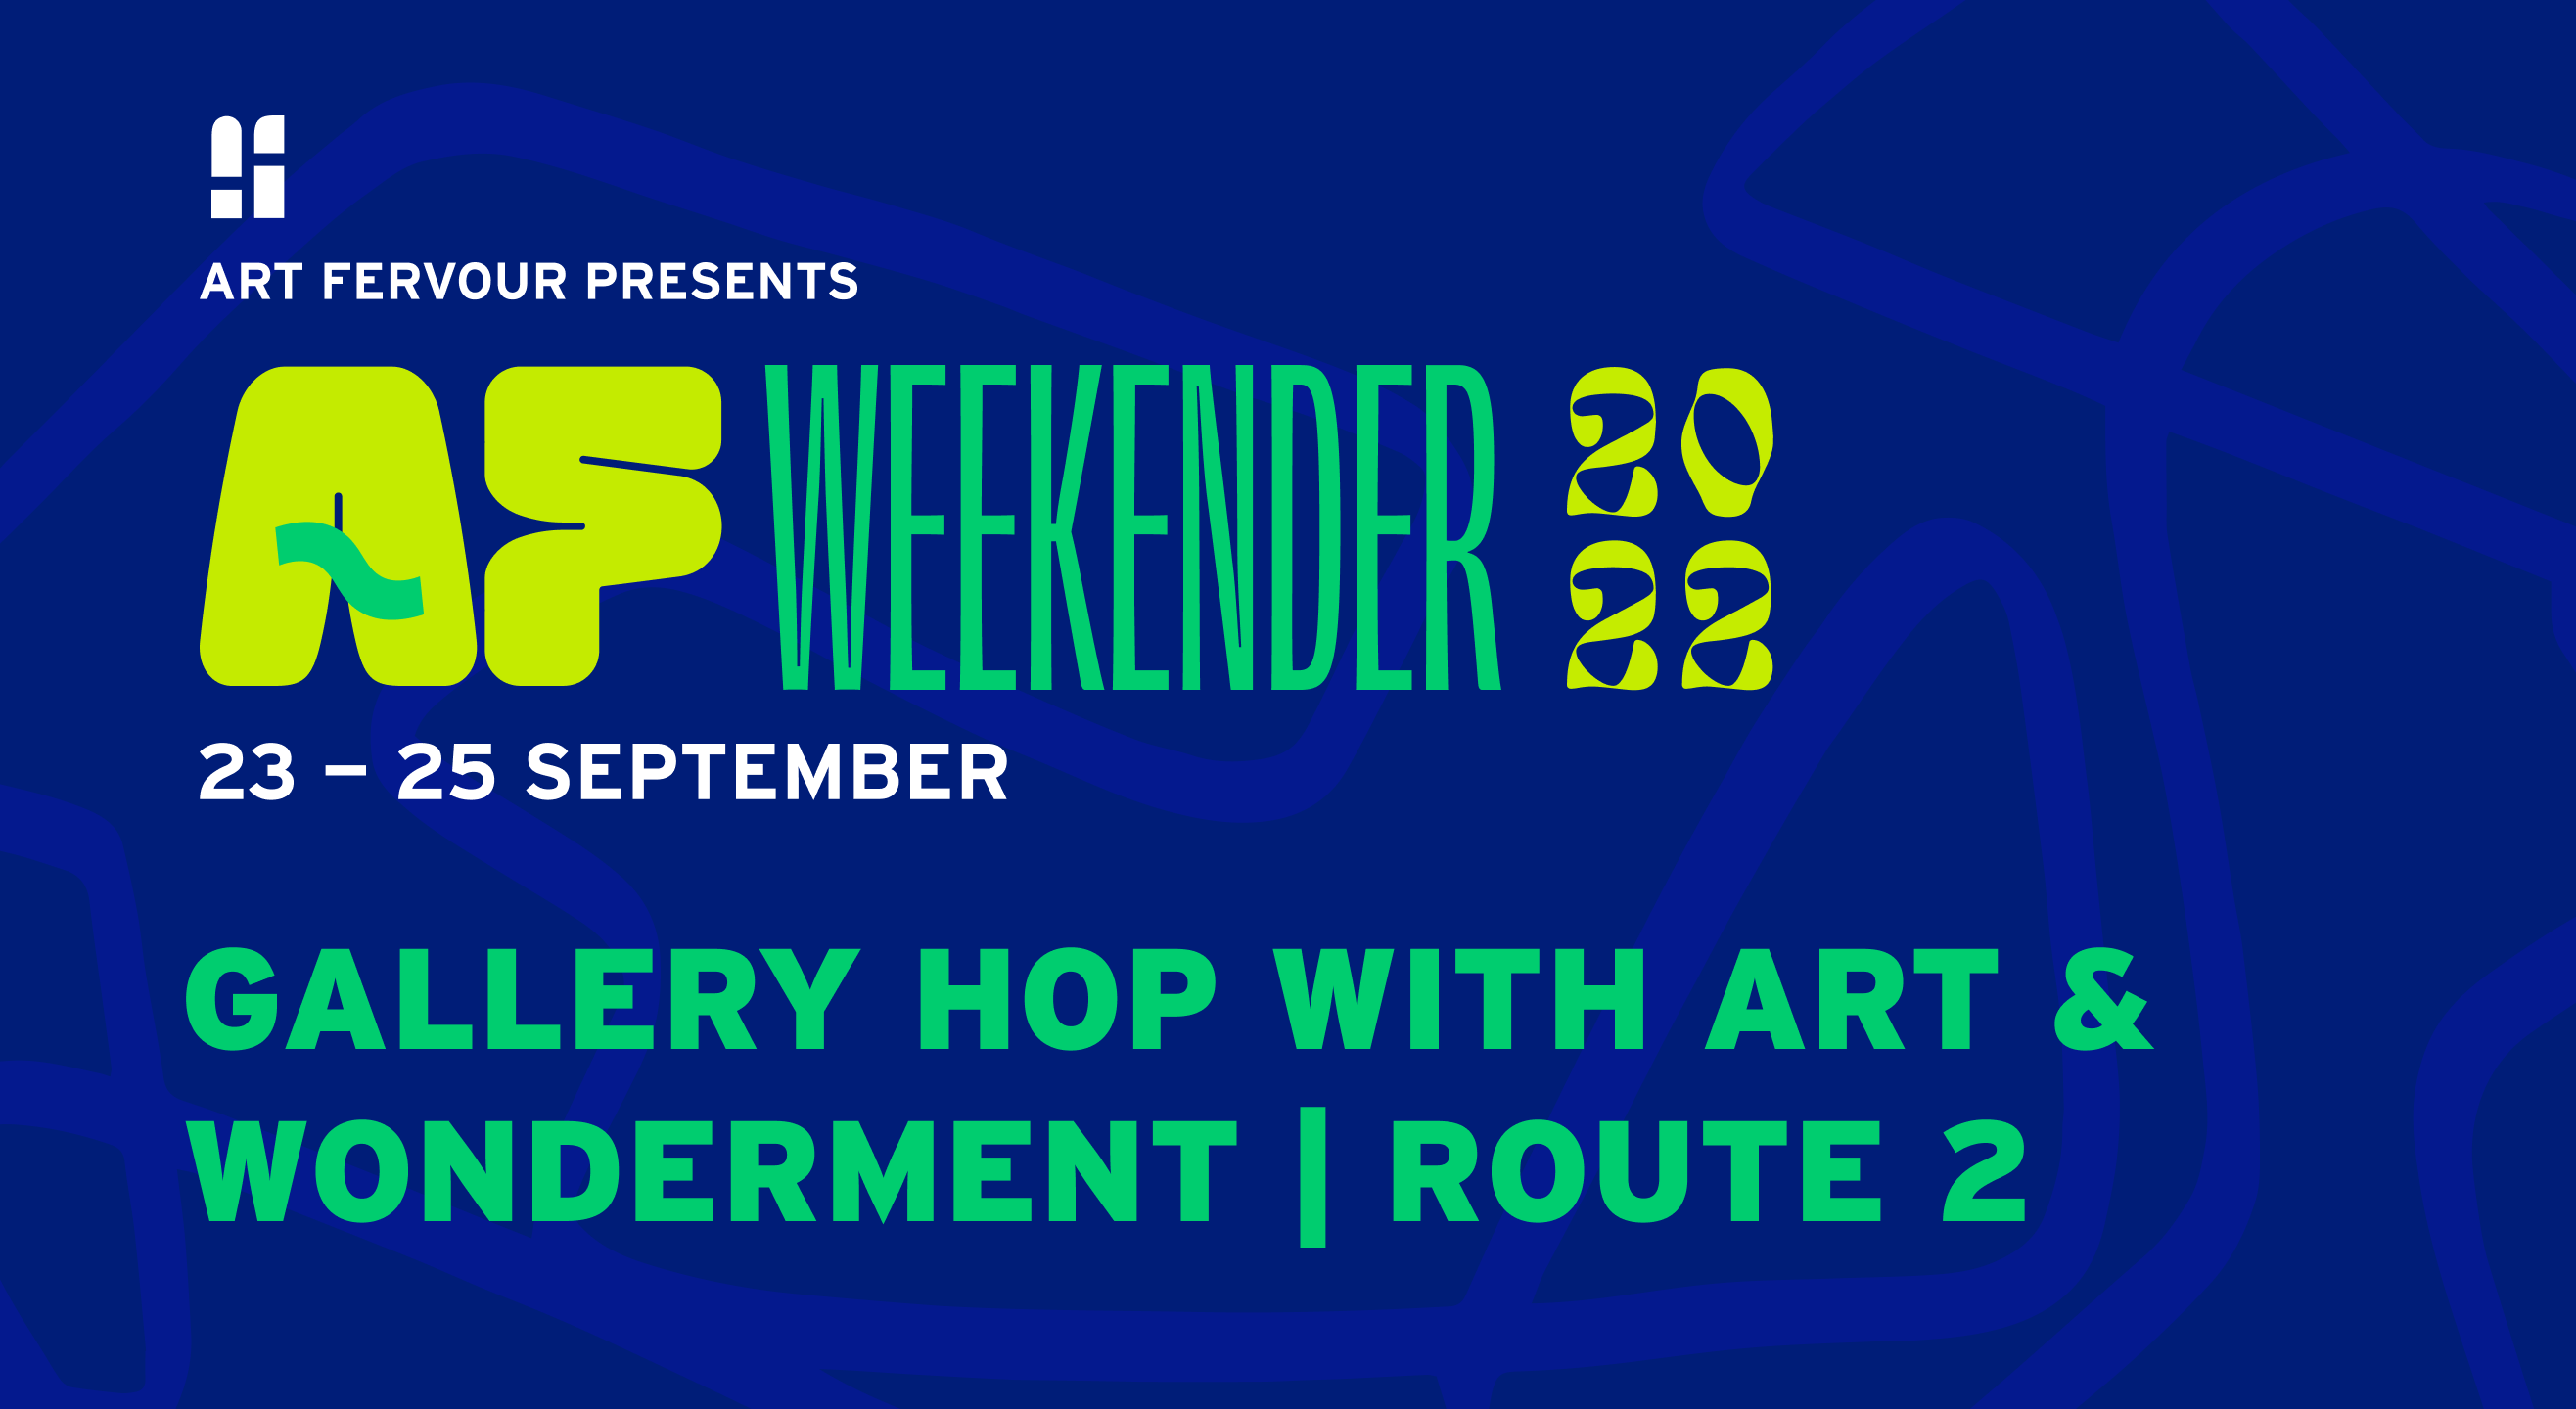 Gallery Hop with Art & Wonderment Route 2